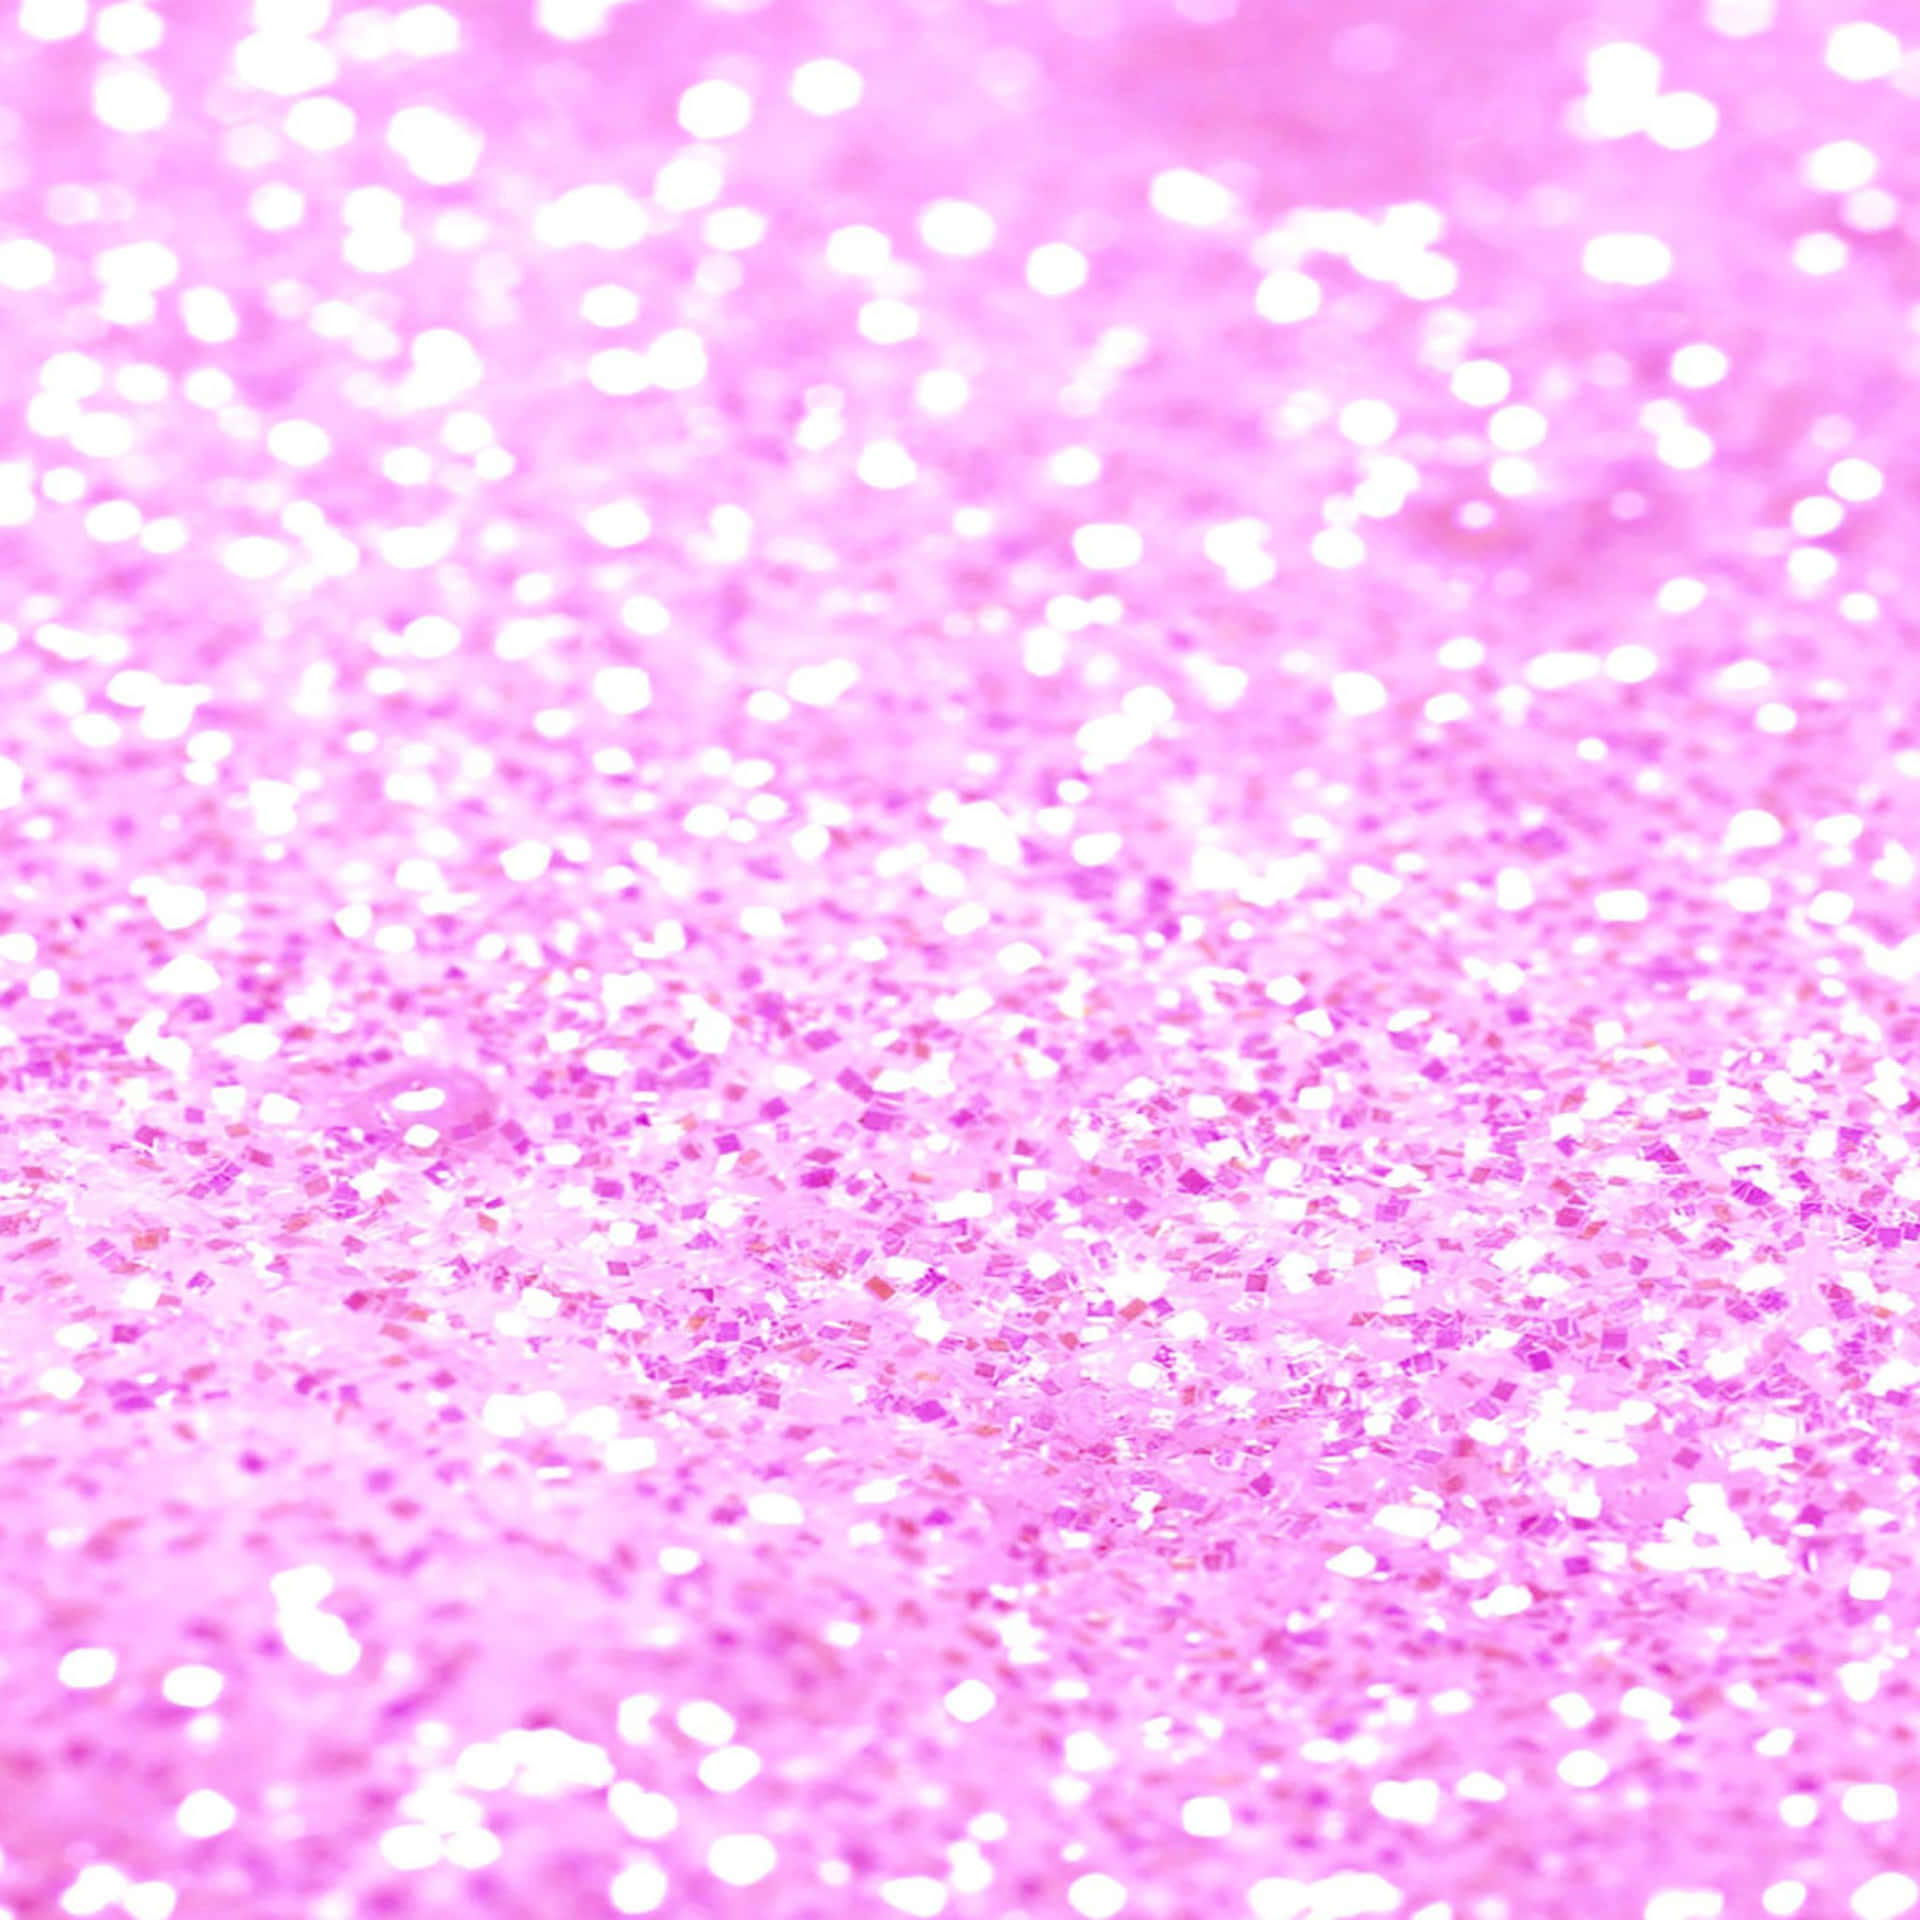 Download Pink Glitter Background - Stock Photo Wallpaper | Wallpapers.com